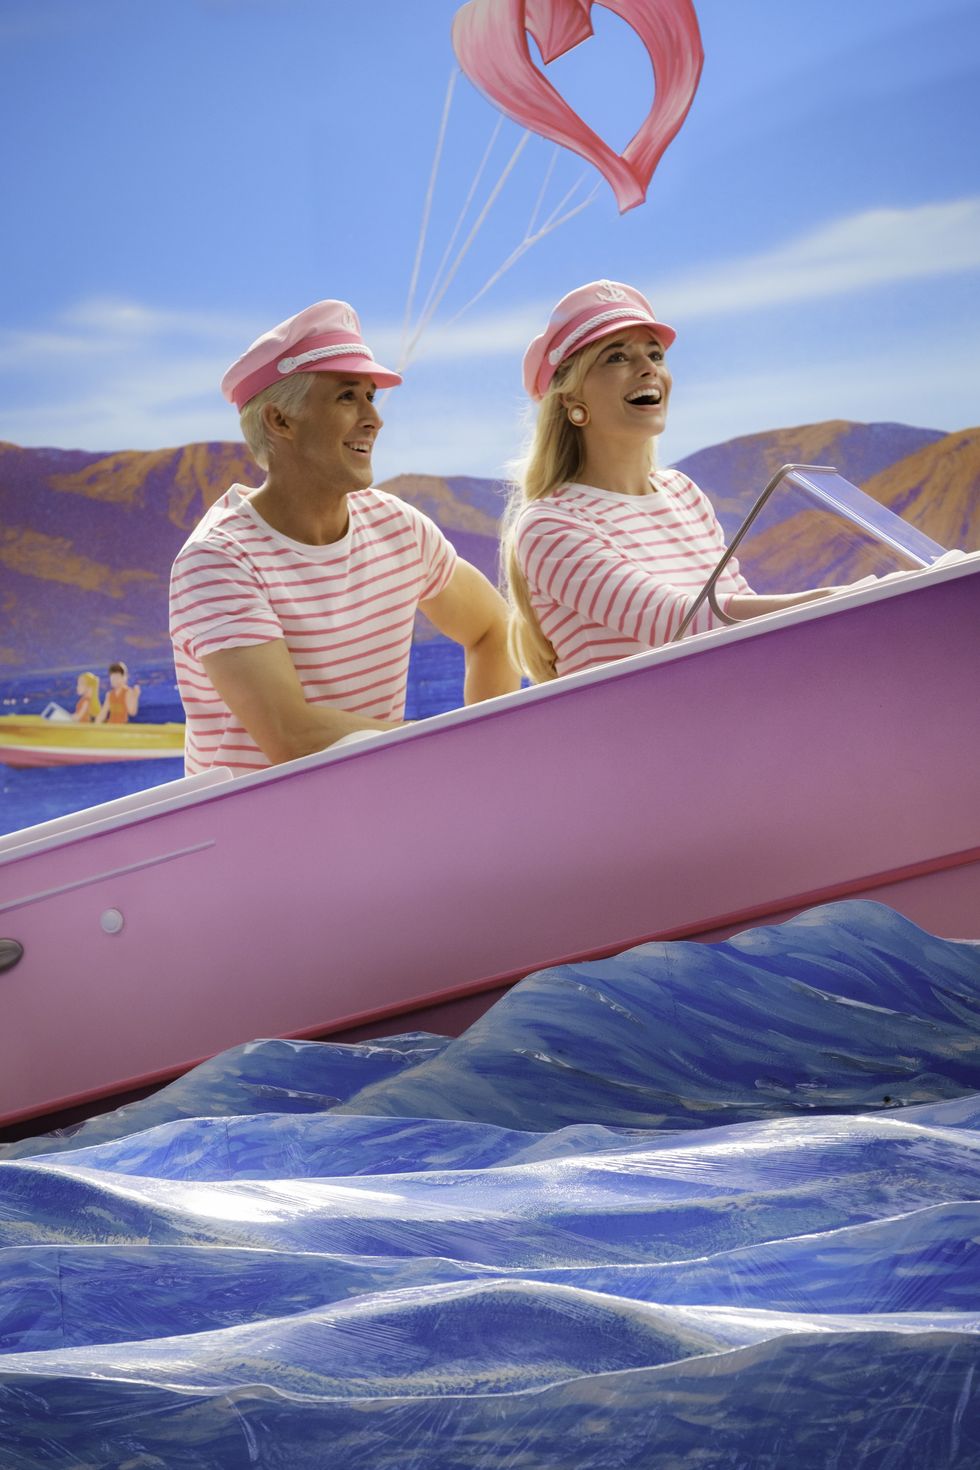 barbie and ken in a pink boat from the barbie movie